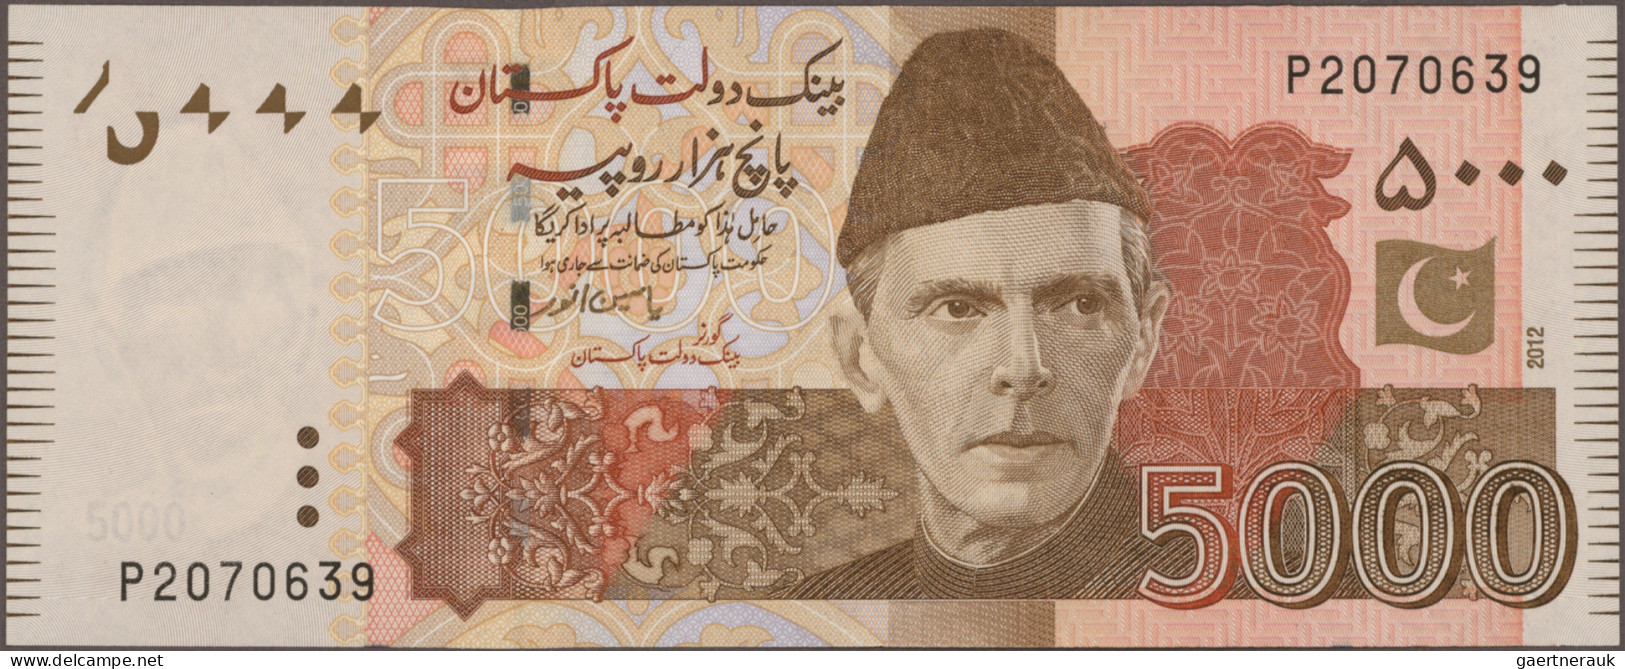 Pakistan: Government and State Bank of Pakistan, lot with 49 banknotes, series 1